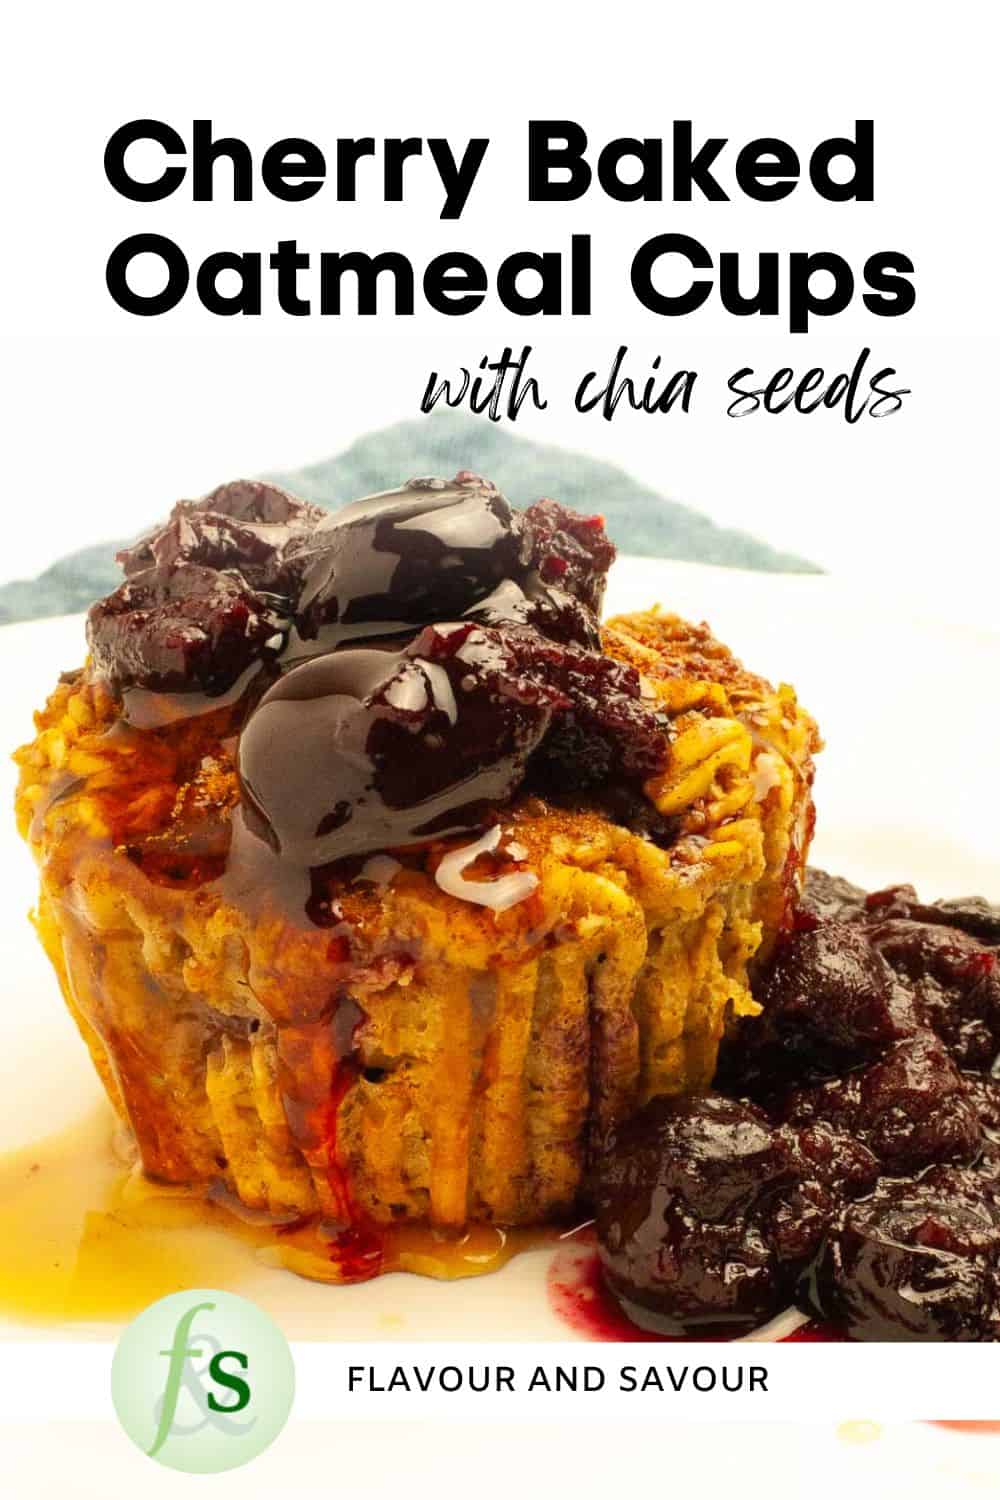 Image with text for cherry baked oatmeal cups.